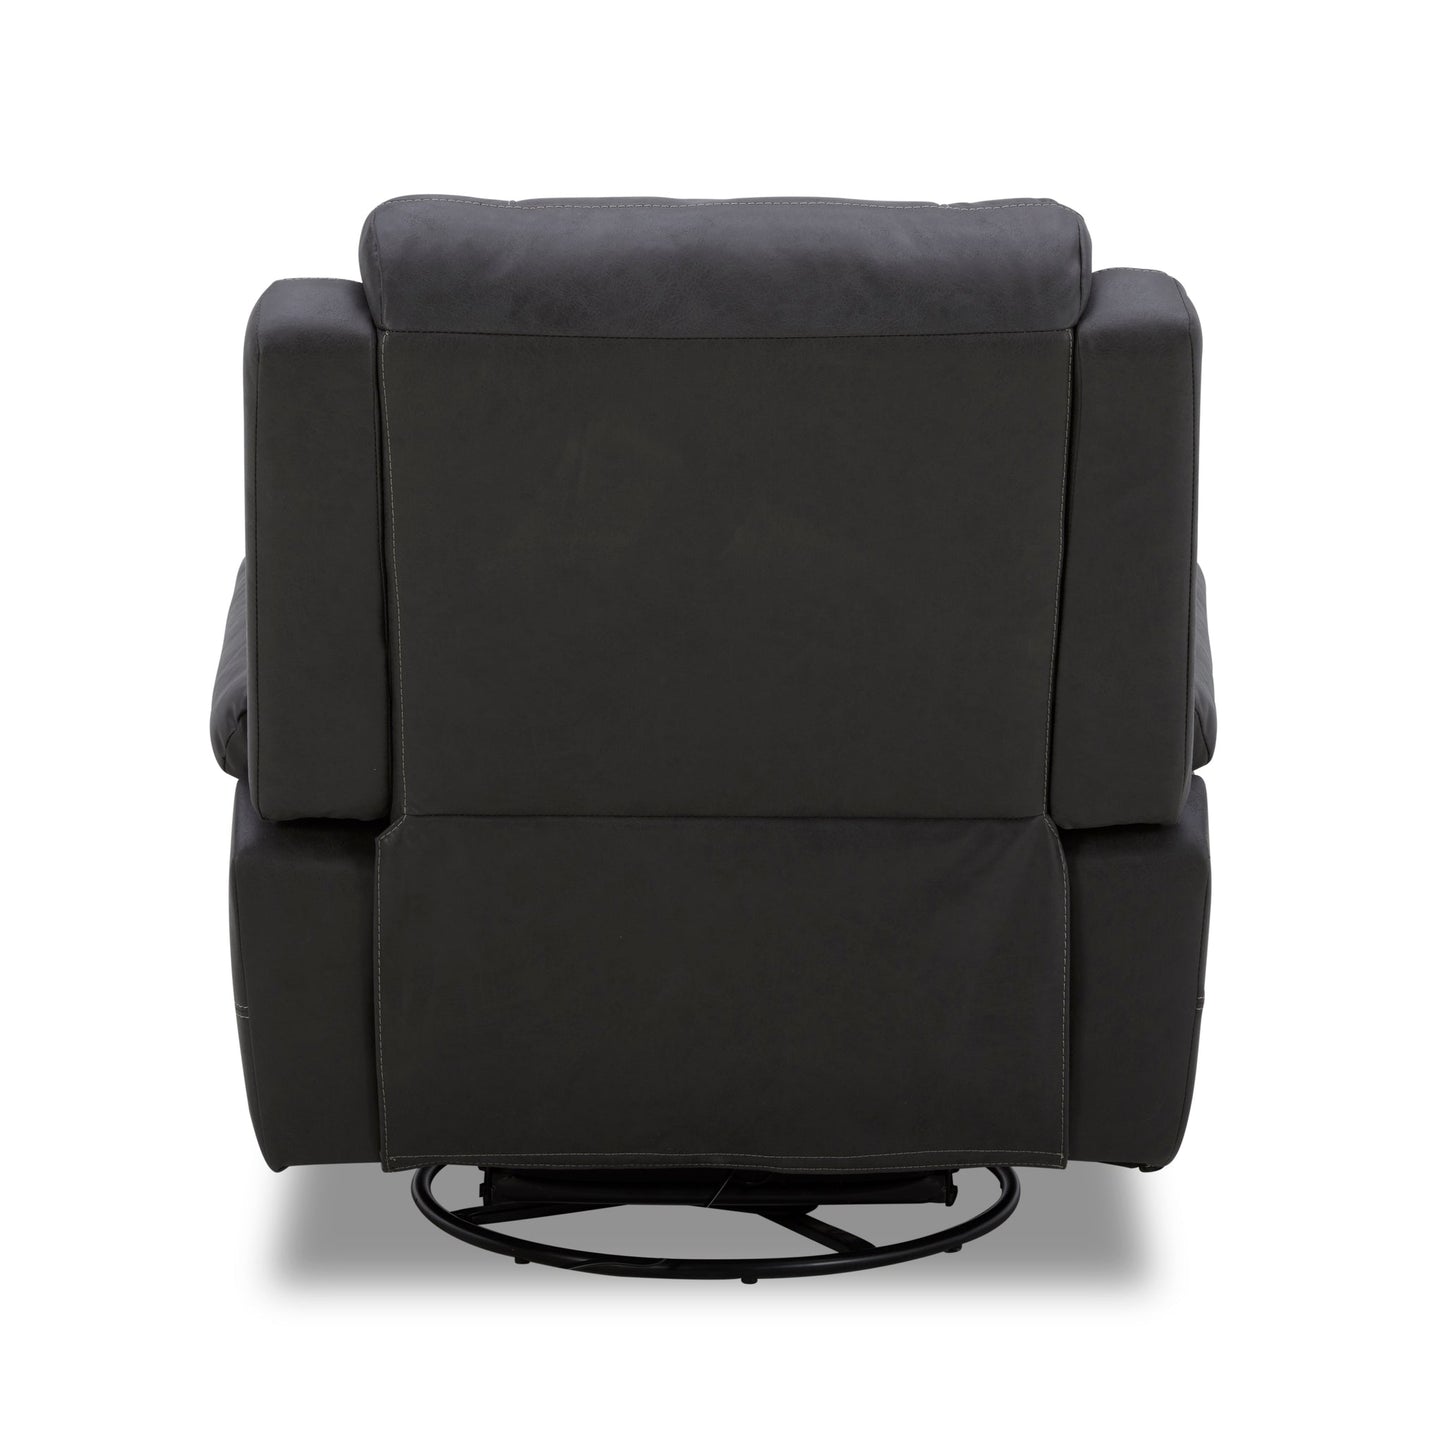 CALDWELL - TAHOE CHARCOAL POWER SWIVEL GLIDER RECLINER